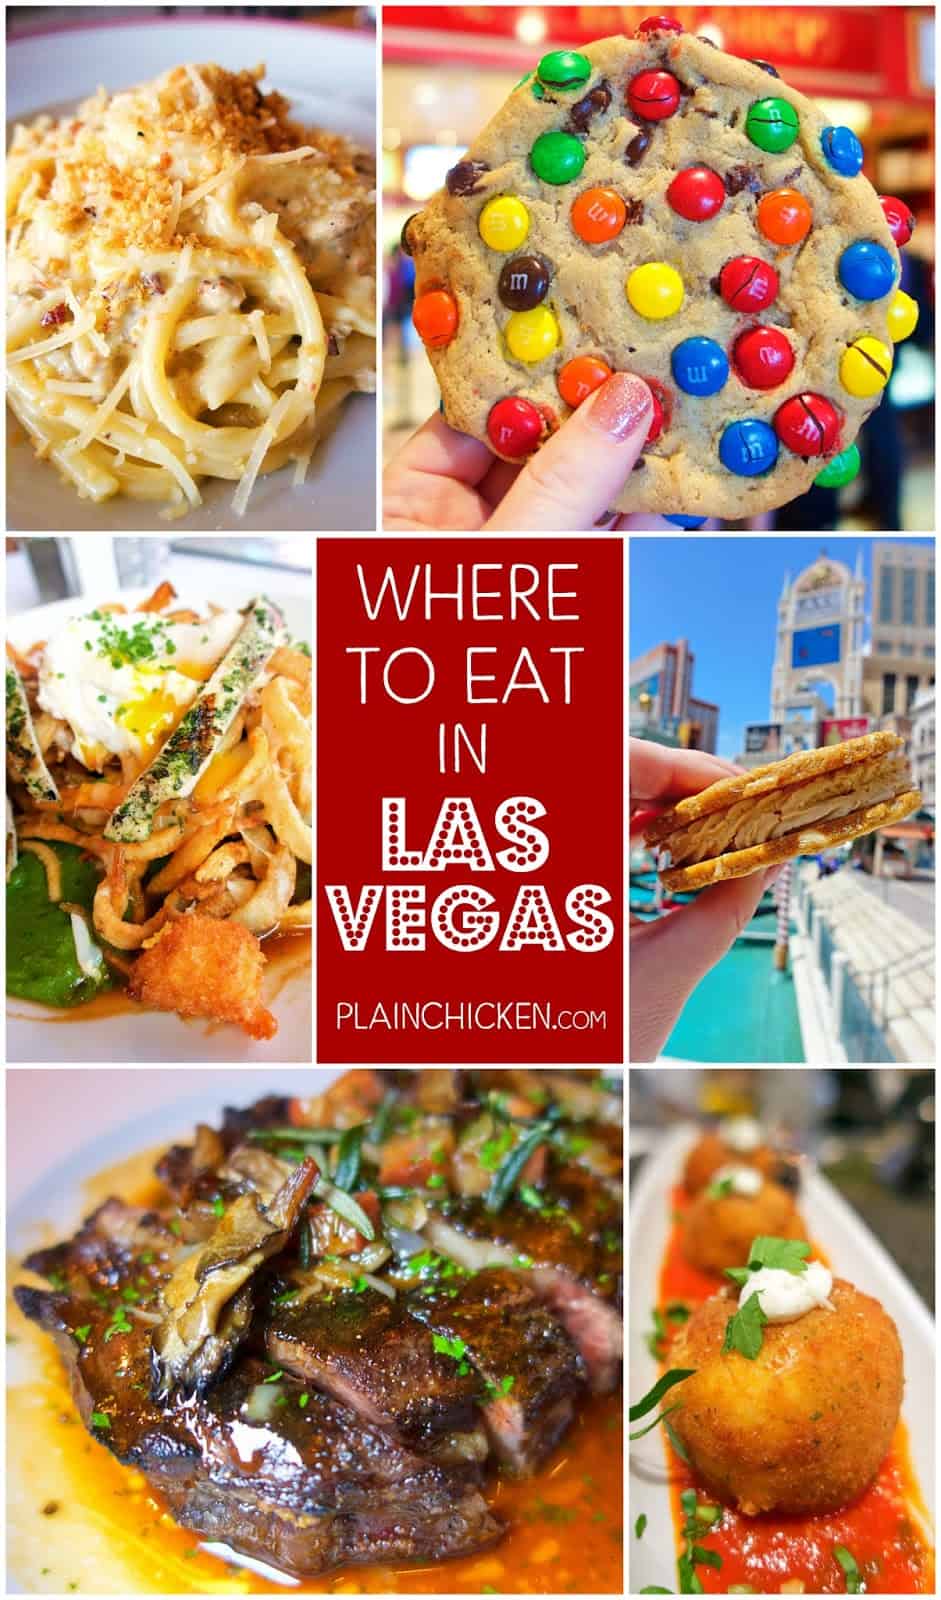 Where to Eat in Las Vegas - we ate our way down The Strip. SO many great places!! LVB Burgers and Bar, Buddy V's, Old Homestead, Carmine's, Public House, Carbone, Mon Ami Gabi, Bouchon Bakery, Lavo - don't miss this! Something for everyone!